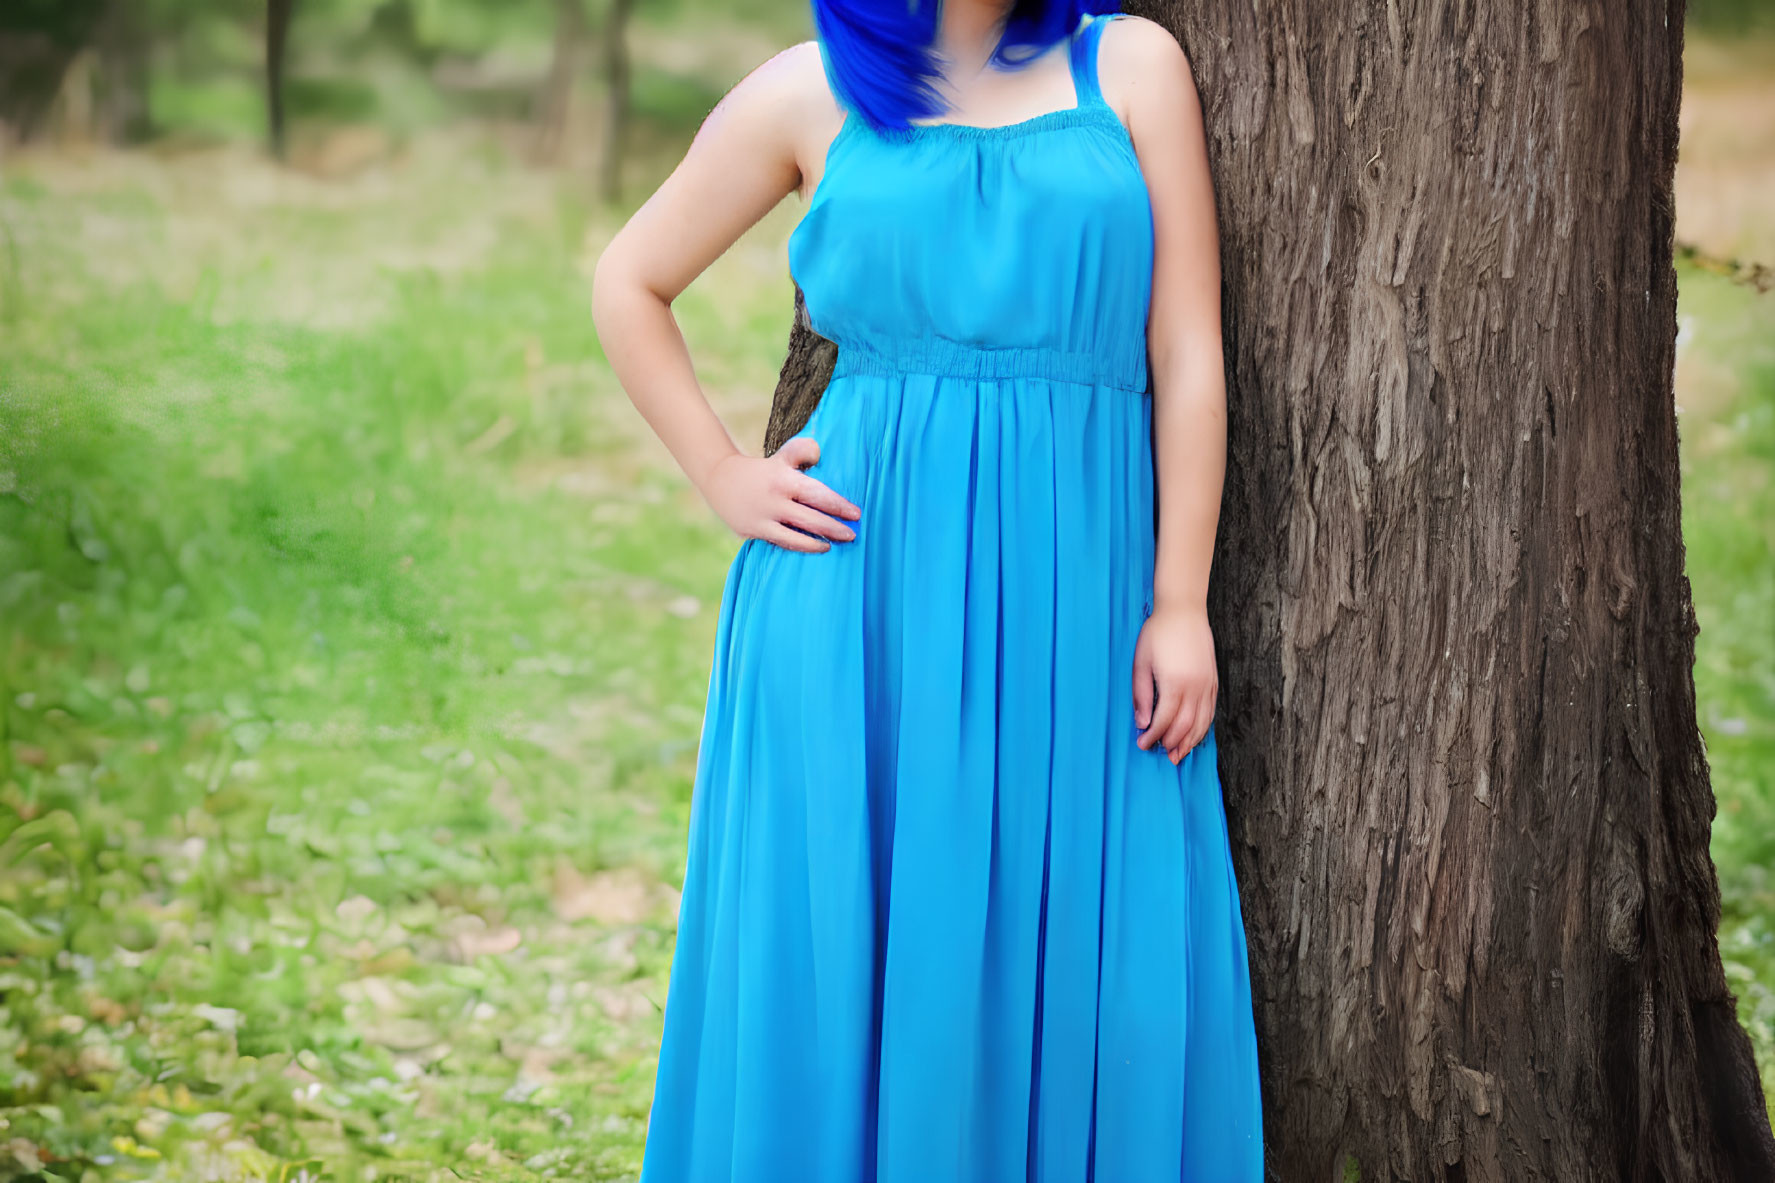 Blue-haired person in long dress by tree in grassy setting